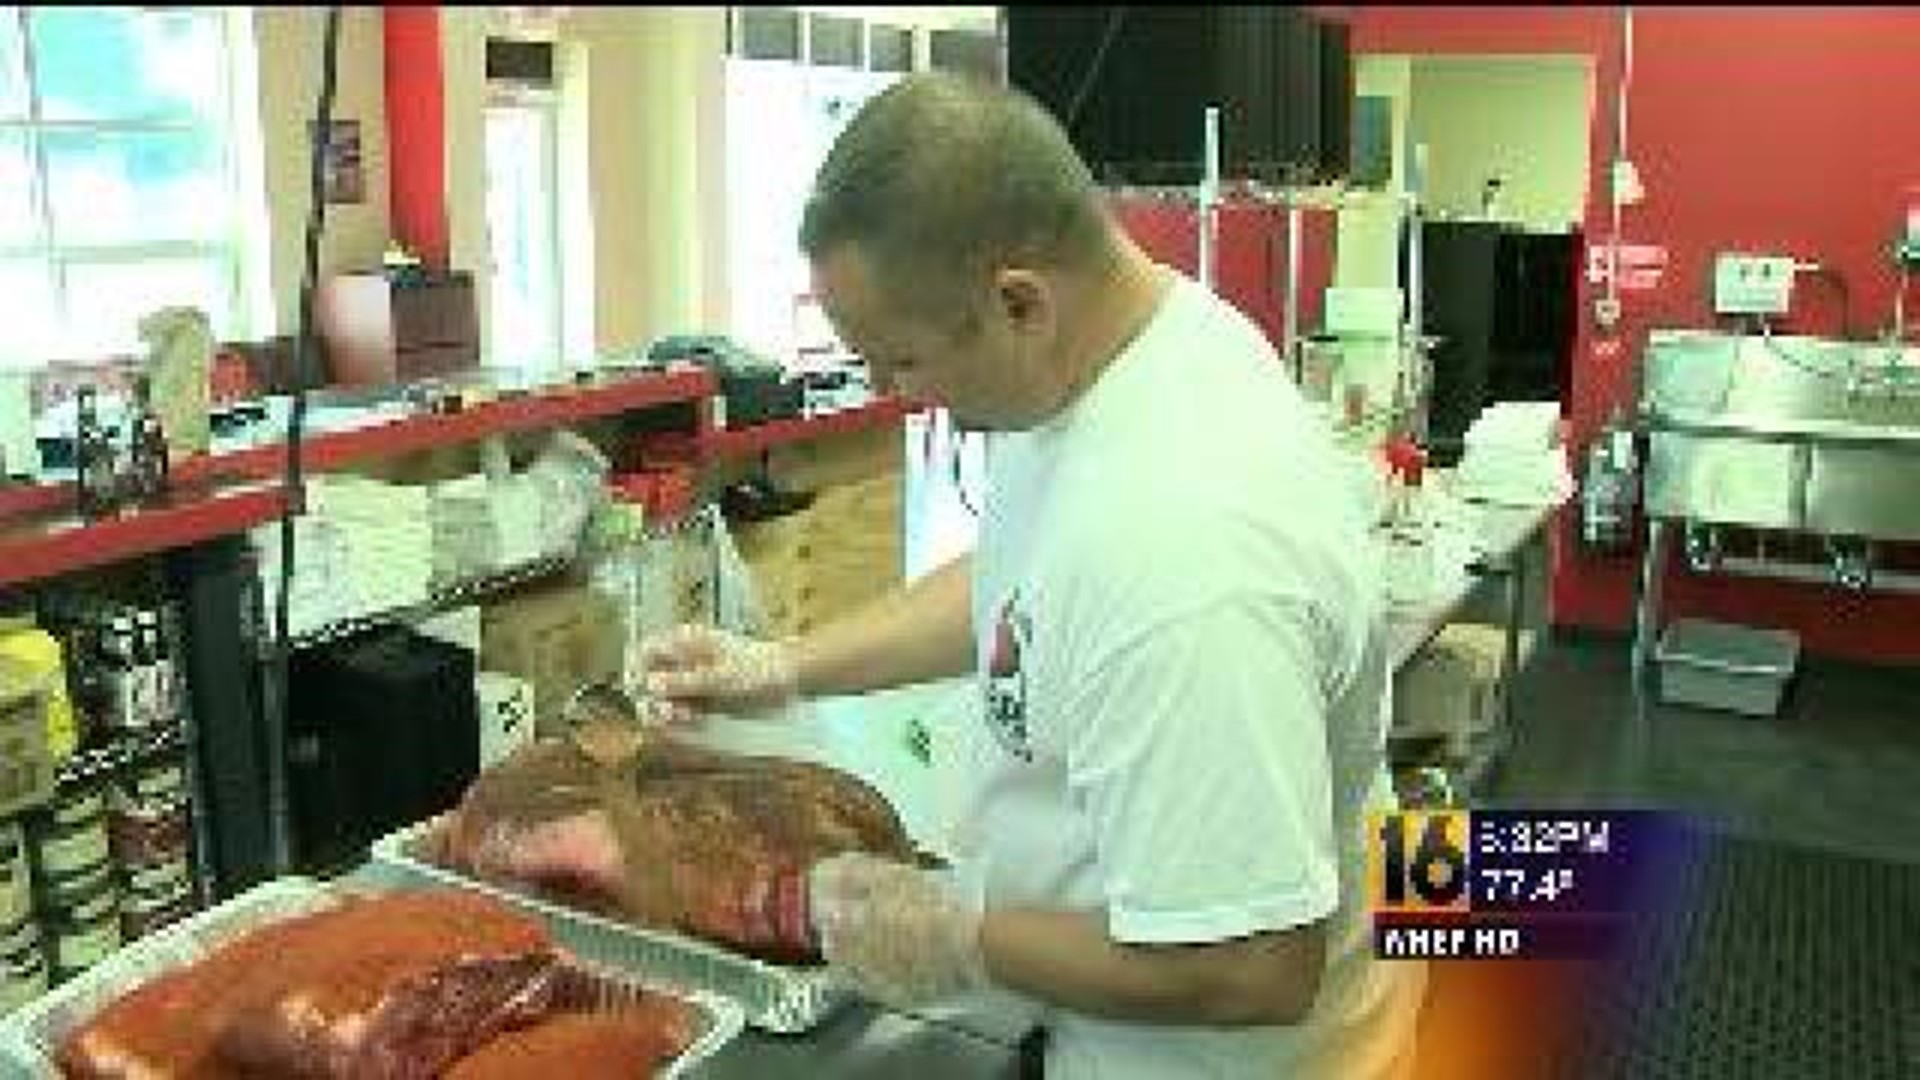 BBQ Restaurant Replaces Flooded Business